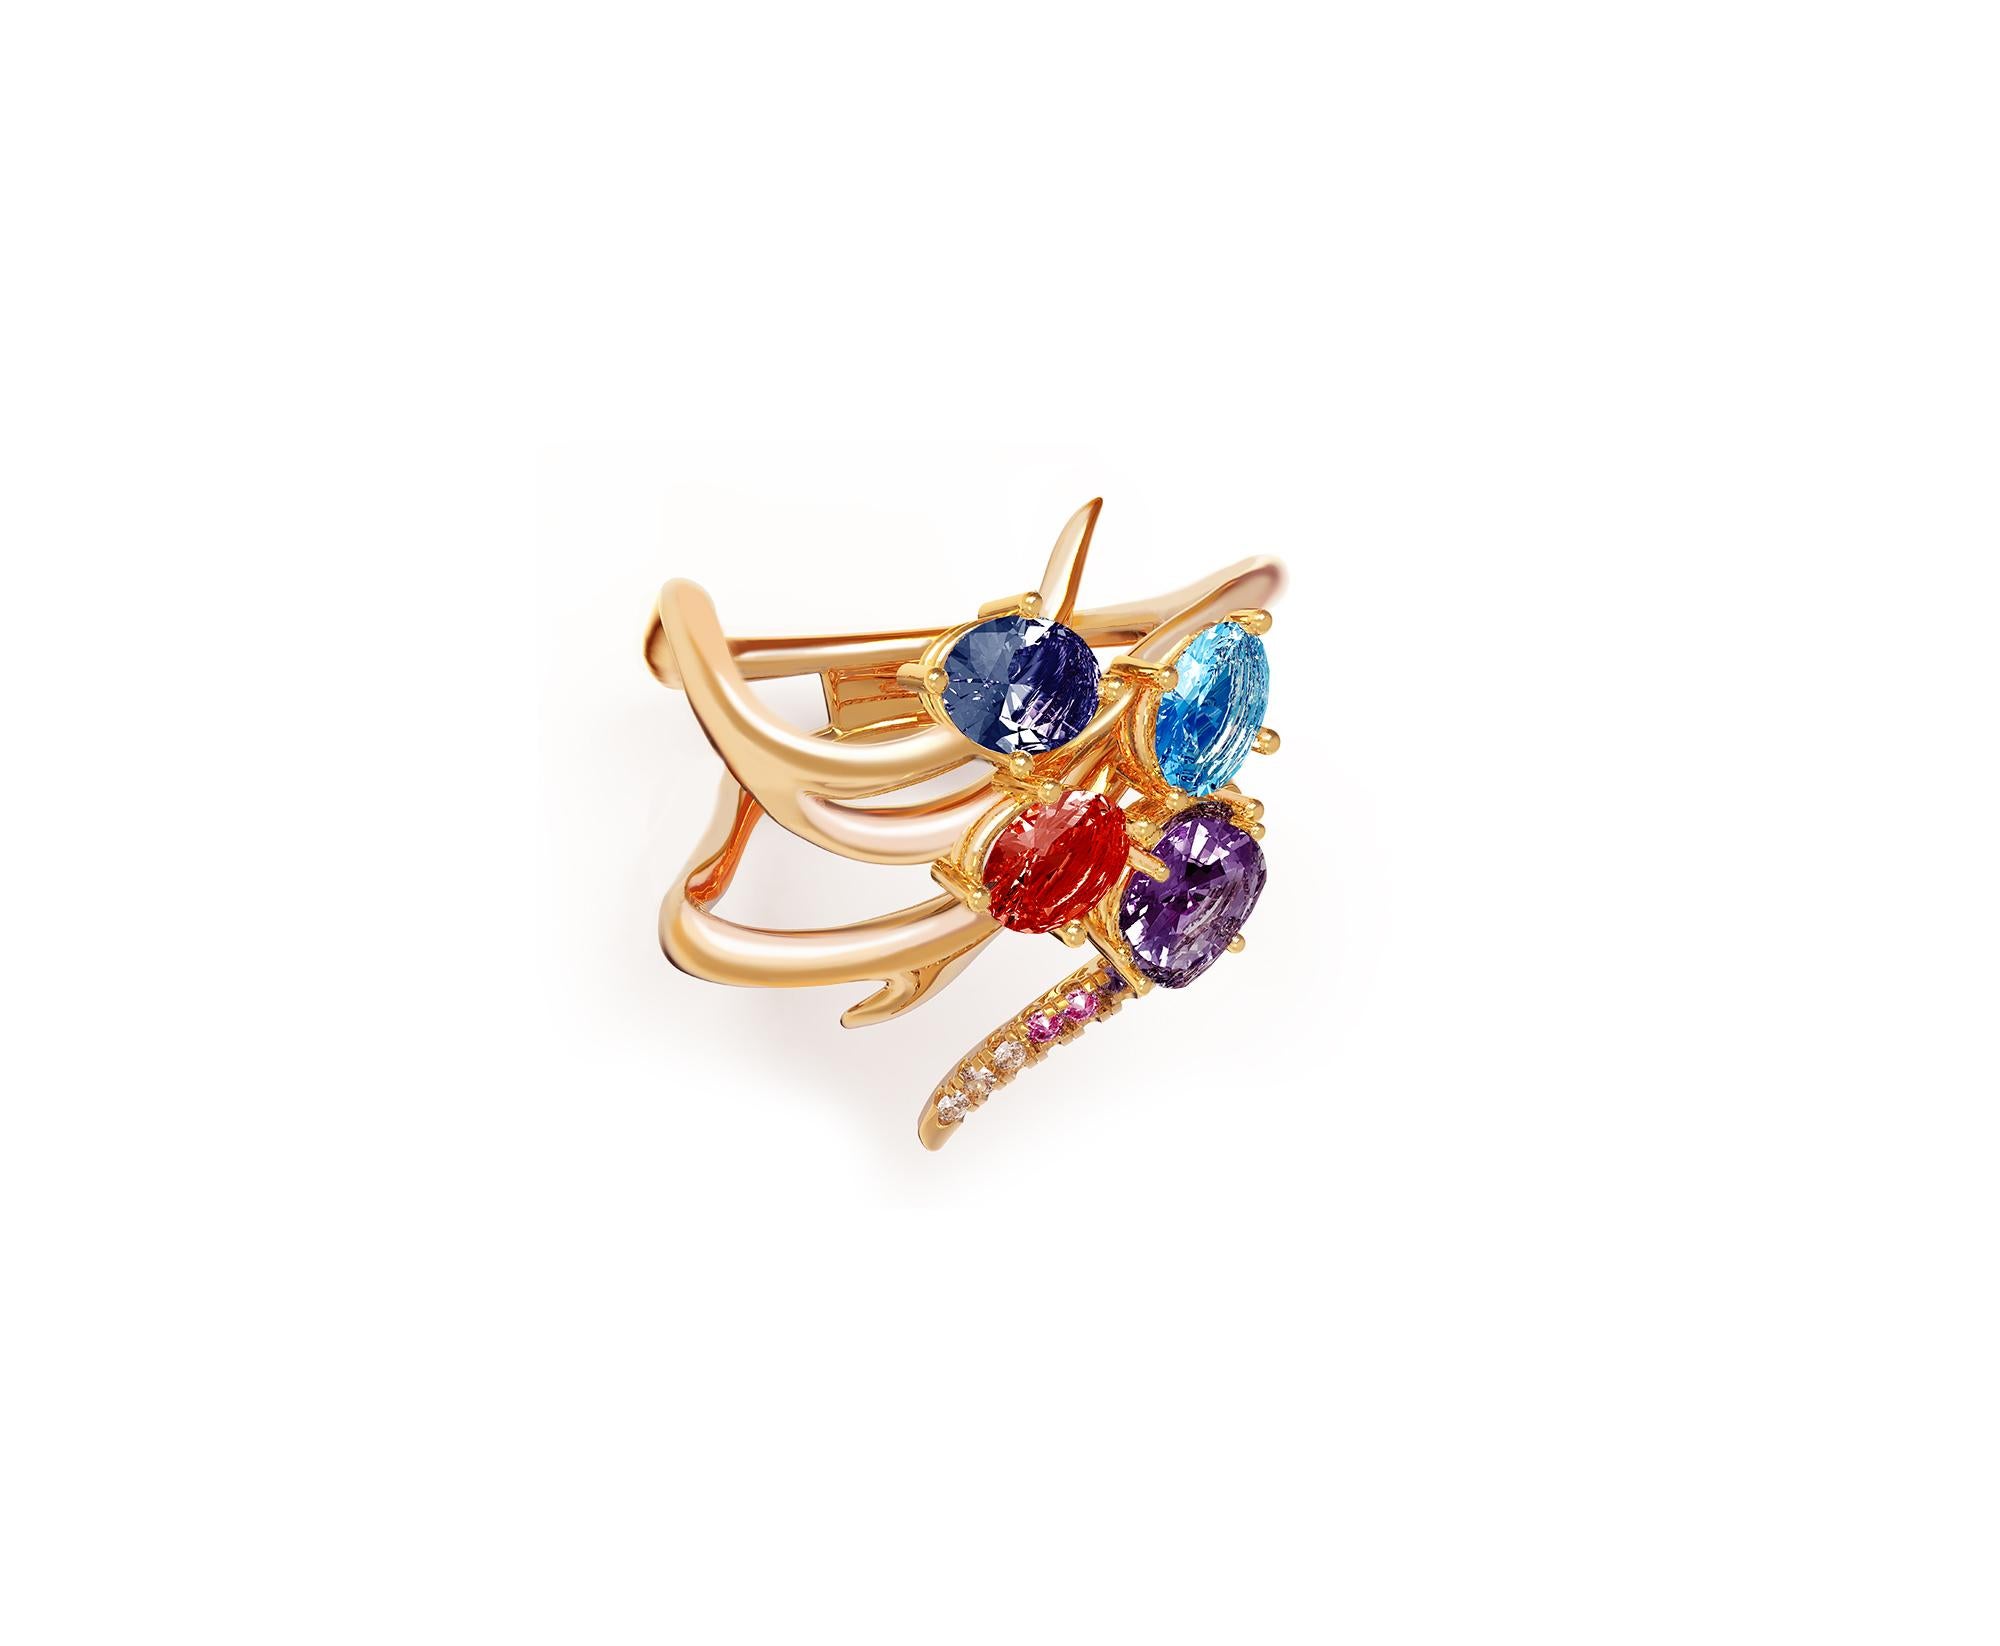 This Harajuku contemporary cluster cocktail ring is made of 18 karat yellow gold with natural gems on your choice custom made.
The gems are:
Pear cut vivid blue sapphire, 1,07 carats;
Red tourmaline in oval cut, 1,53 carats;
Blue swiss topaz and